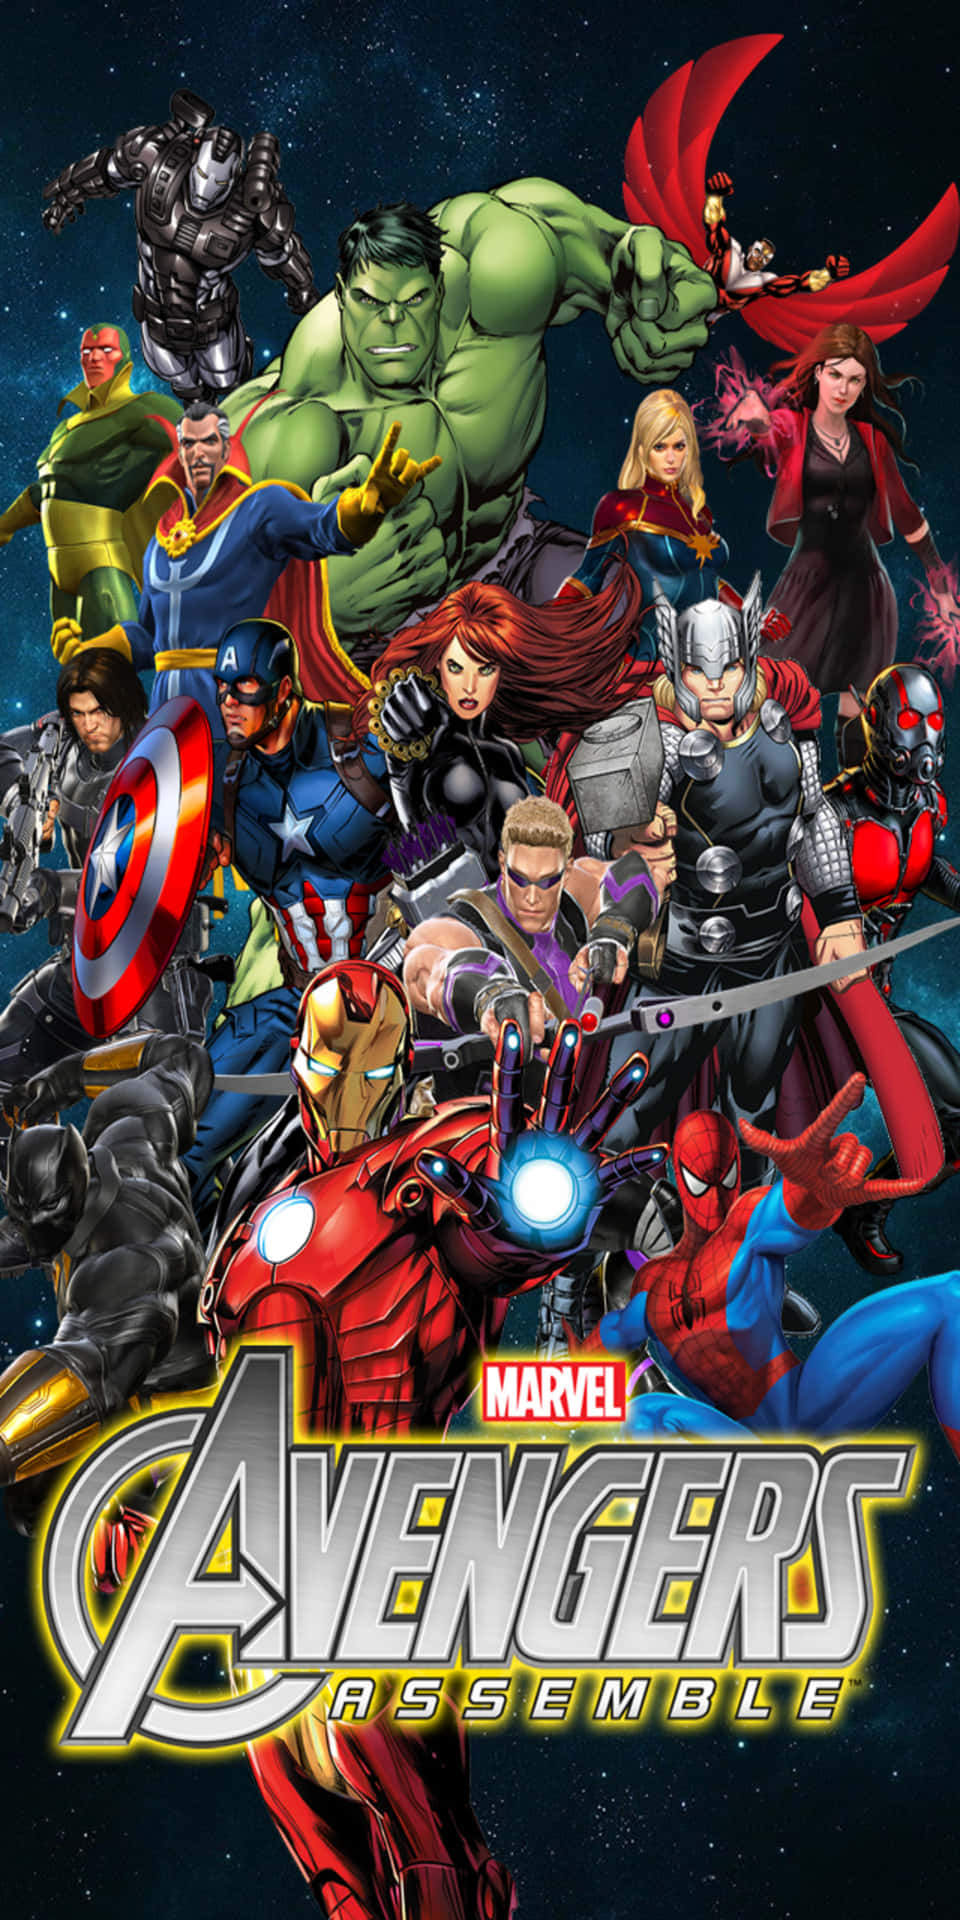 Avengers: Learn to Draw (Marvel) (Marvel Avengers): unknown author:  9781761201493: Amazon.com: Books